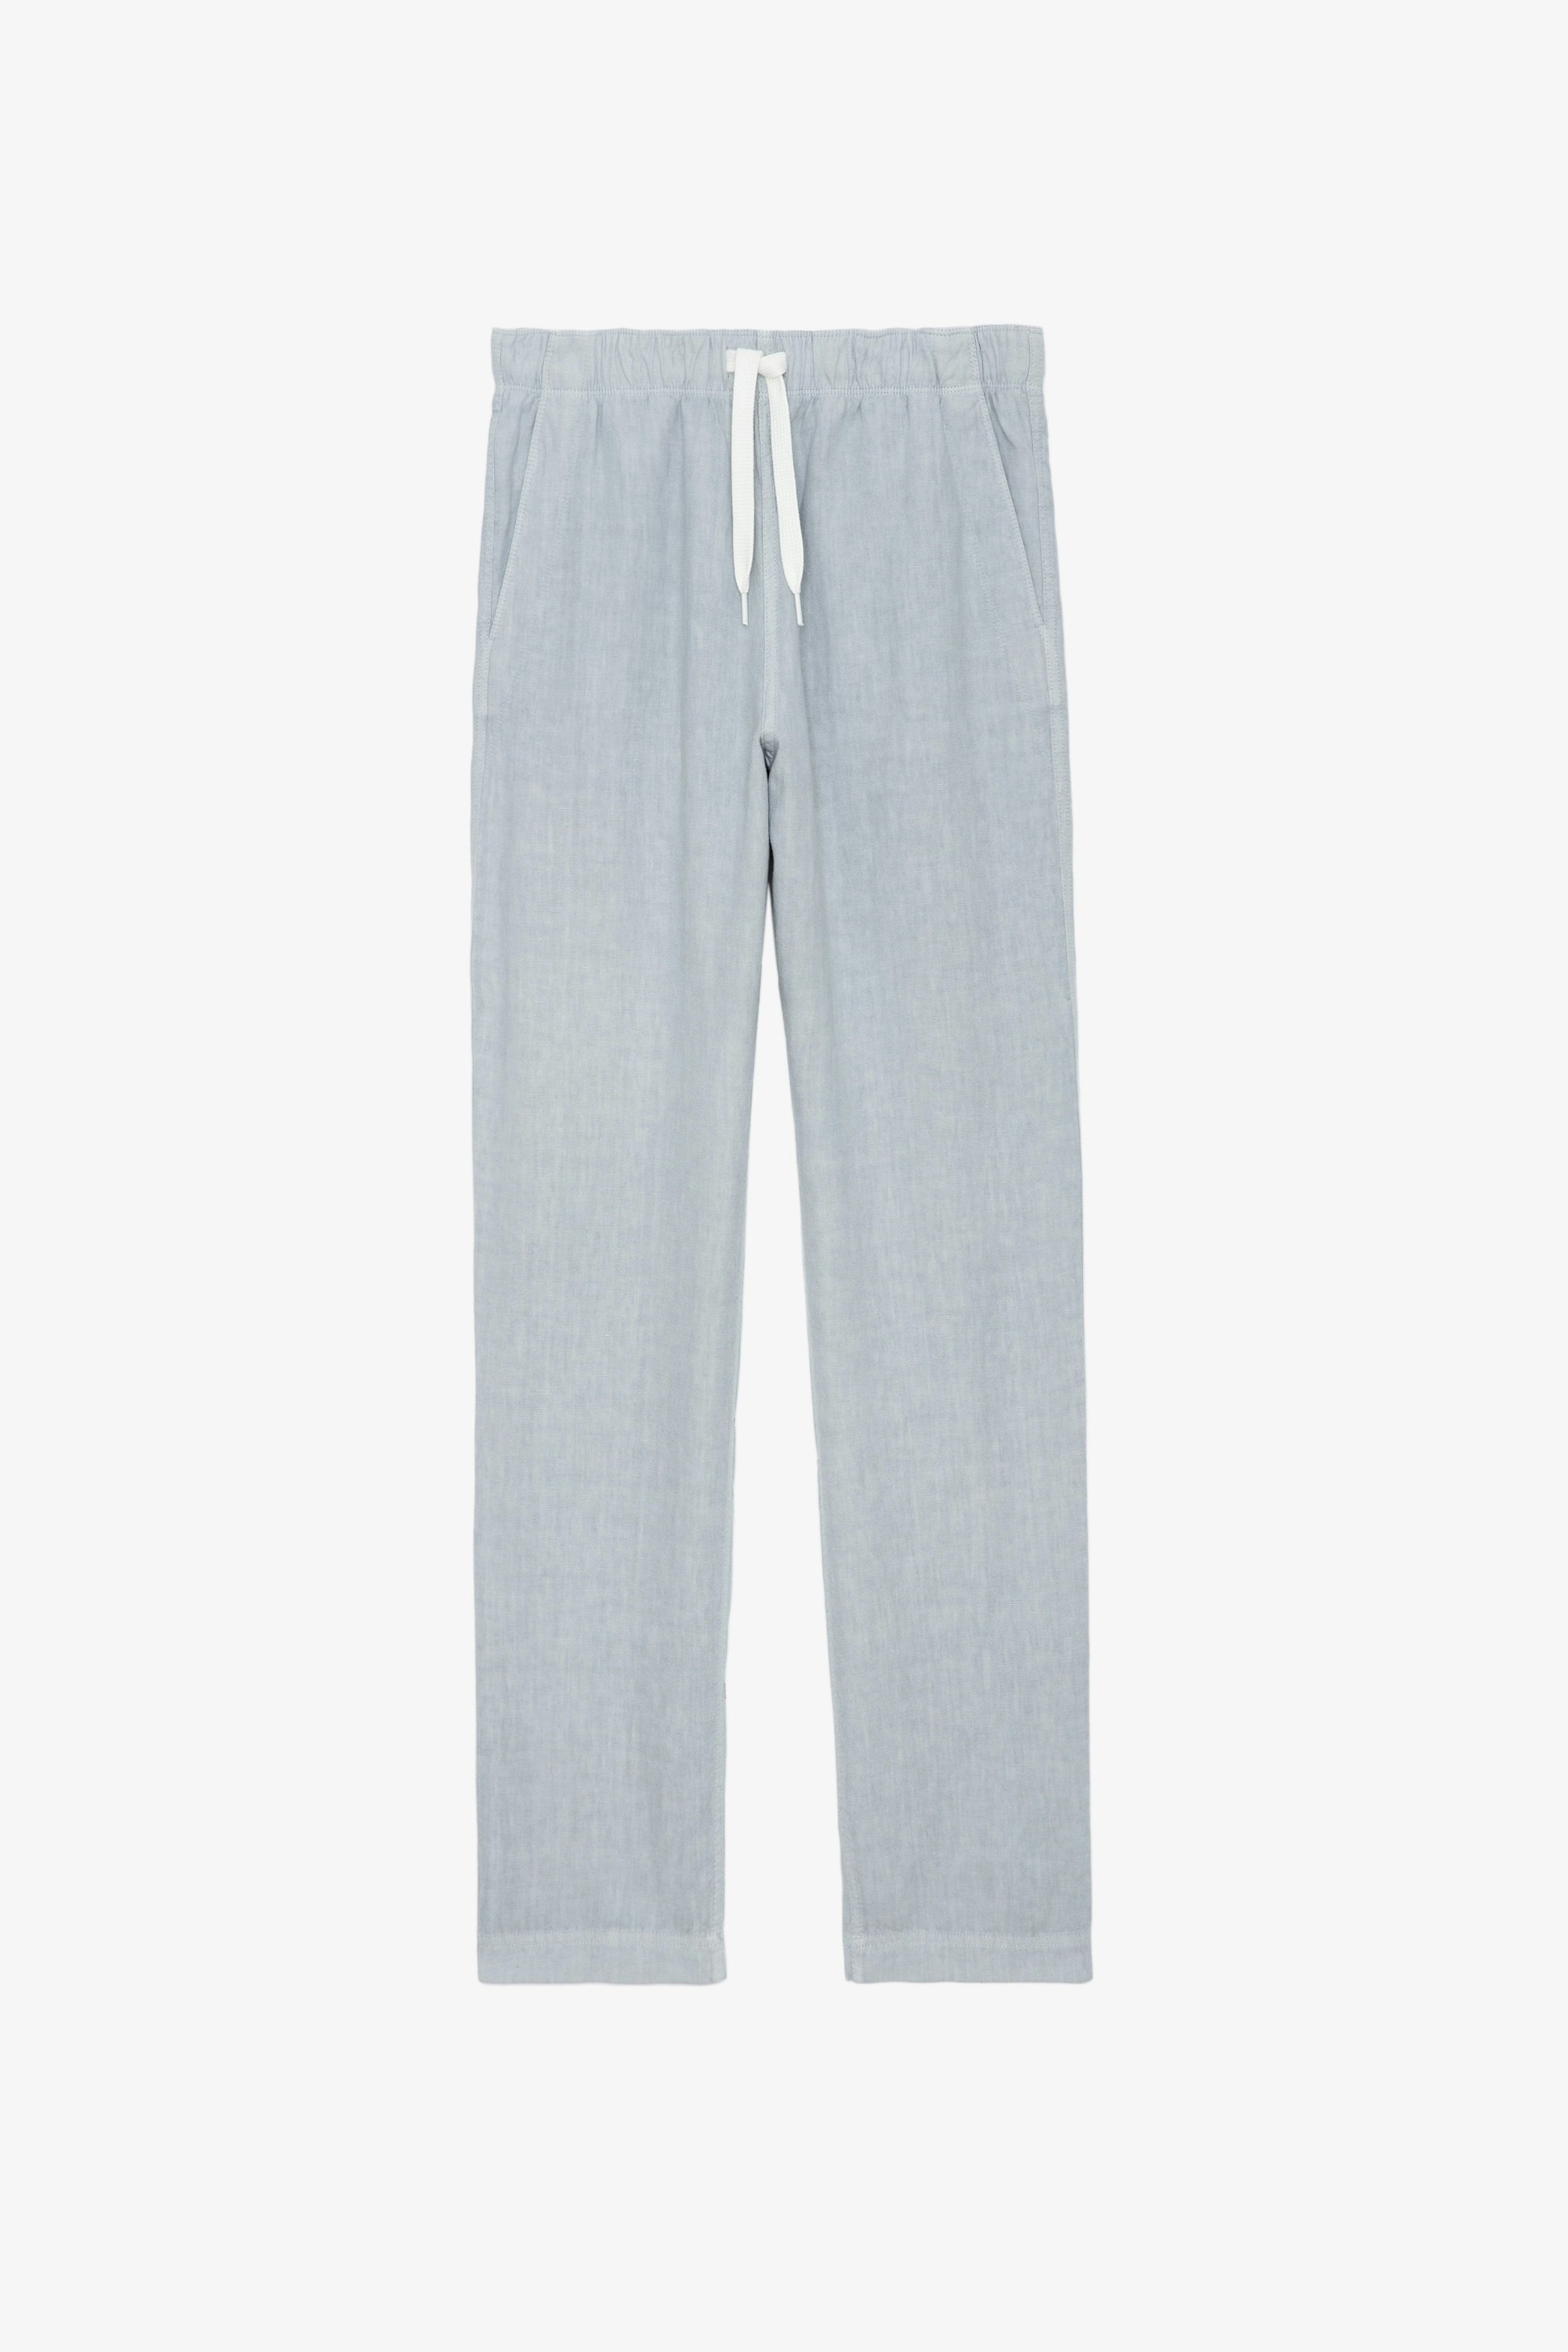 Pixel Linen Trousers - Sky blue washed linen trousers with pockets and drawstring ties.